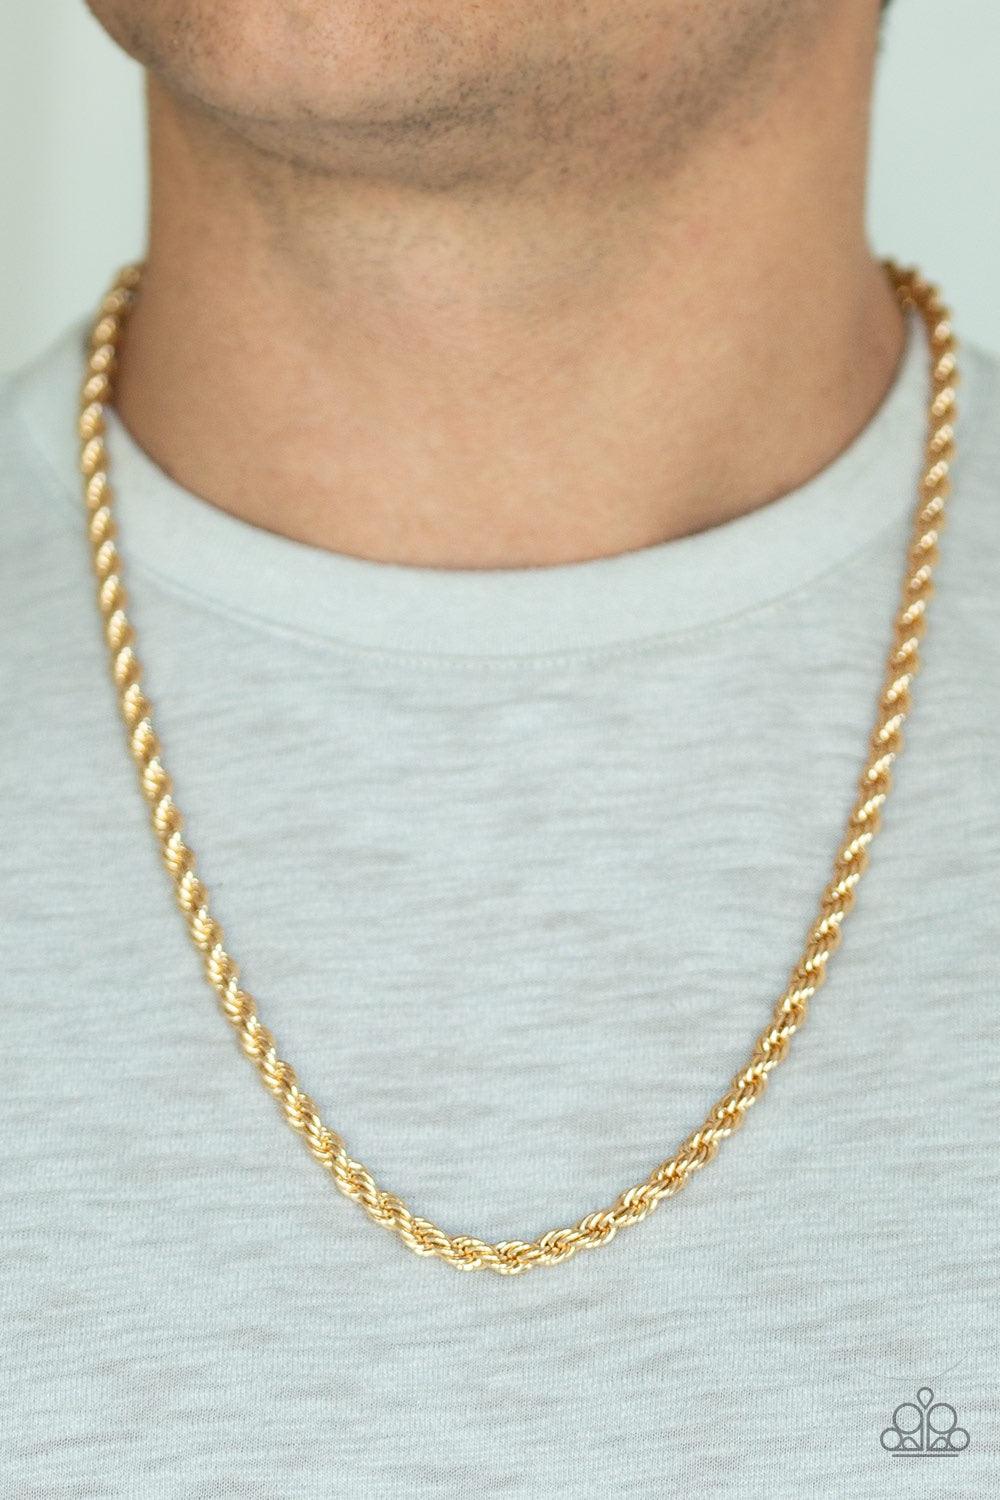 Paparazzi Accessories Double Dribble - Gold Brushed in a high-sheen finish, a thick gold rope chain drapes across the chest for a classic, upscale look. Features an adjustable clasp closure. Jewelry